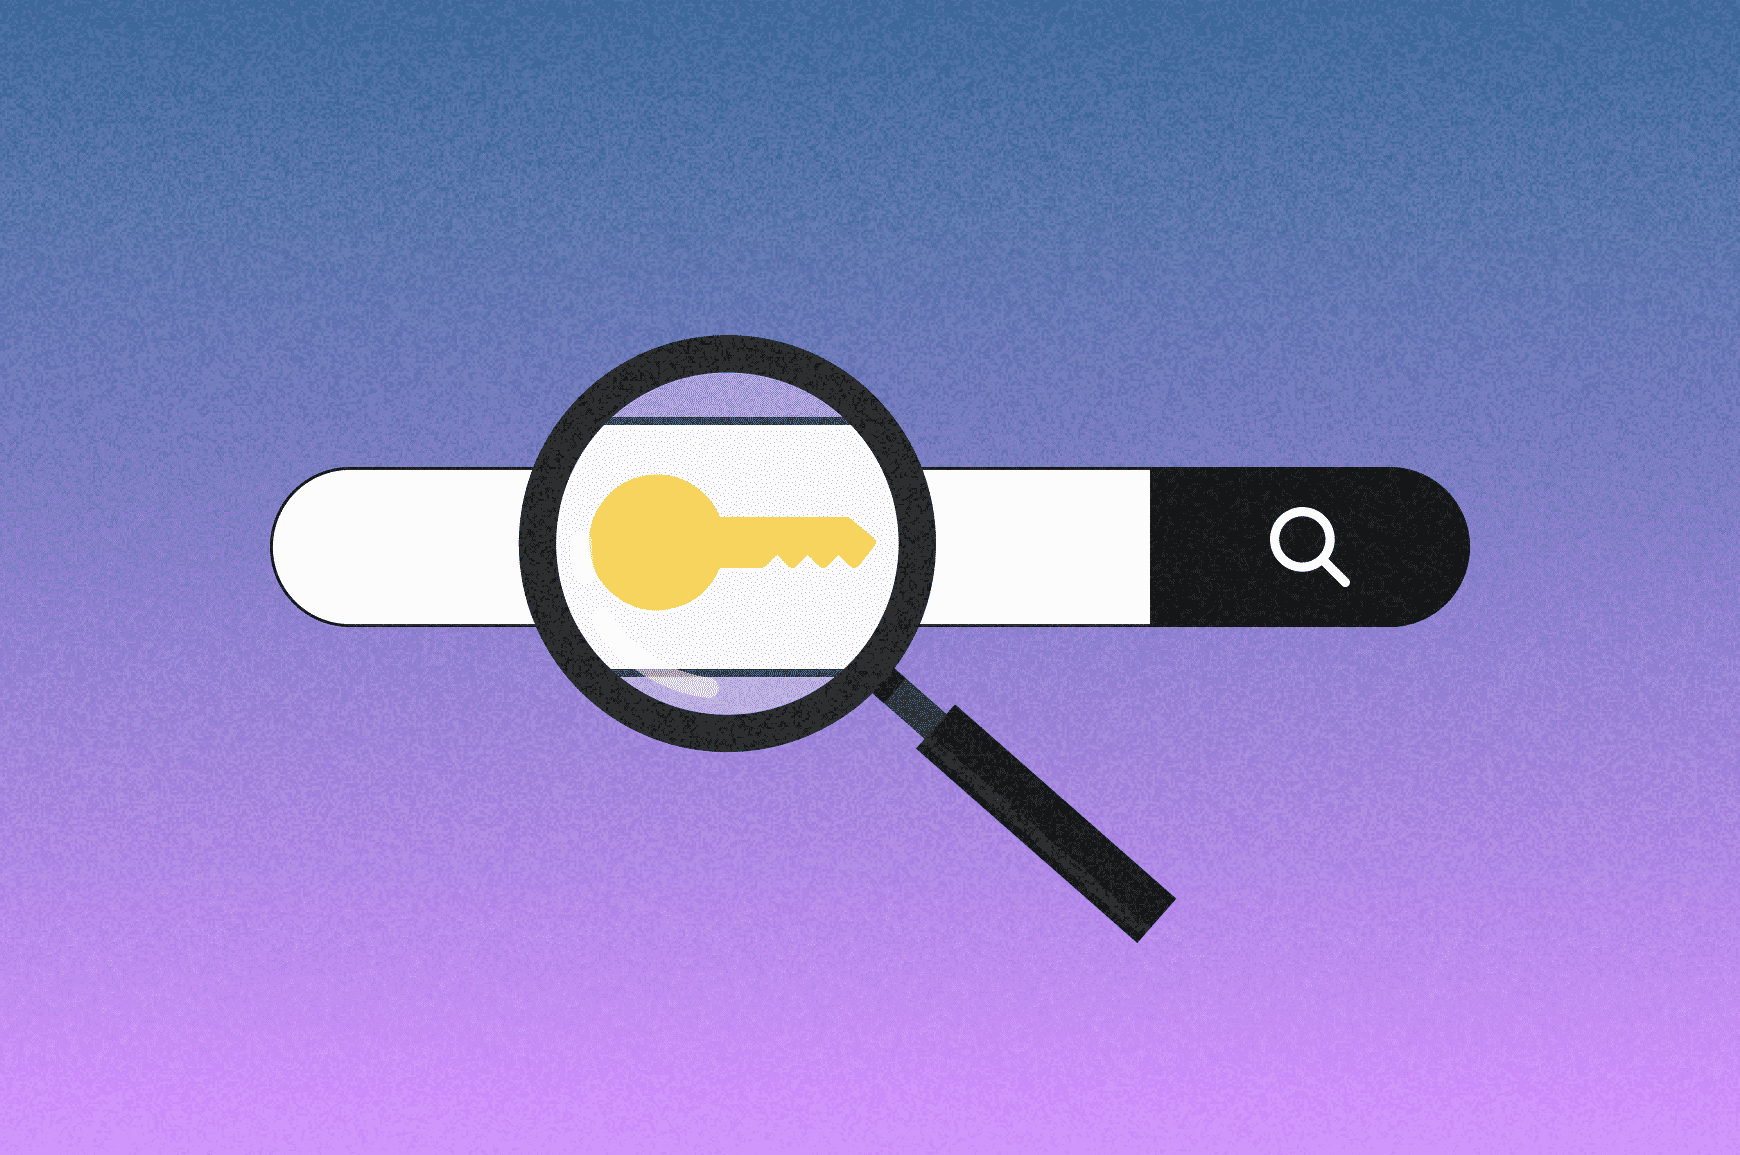 A key in a search bar with a magnifying glass enlarging it, representing keyword research